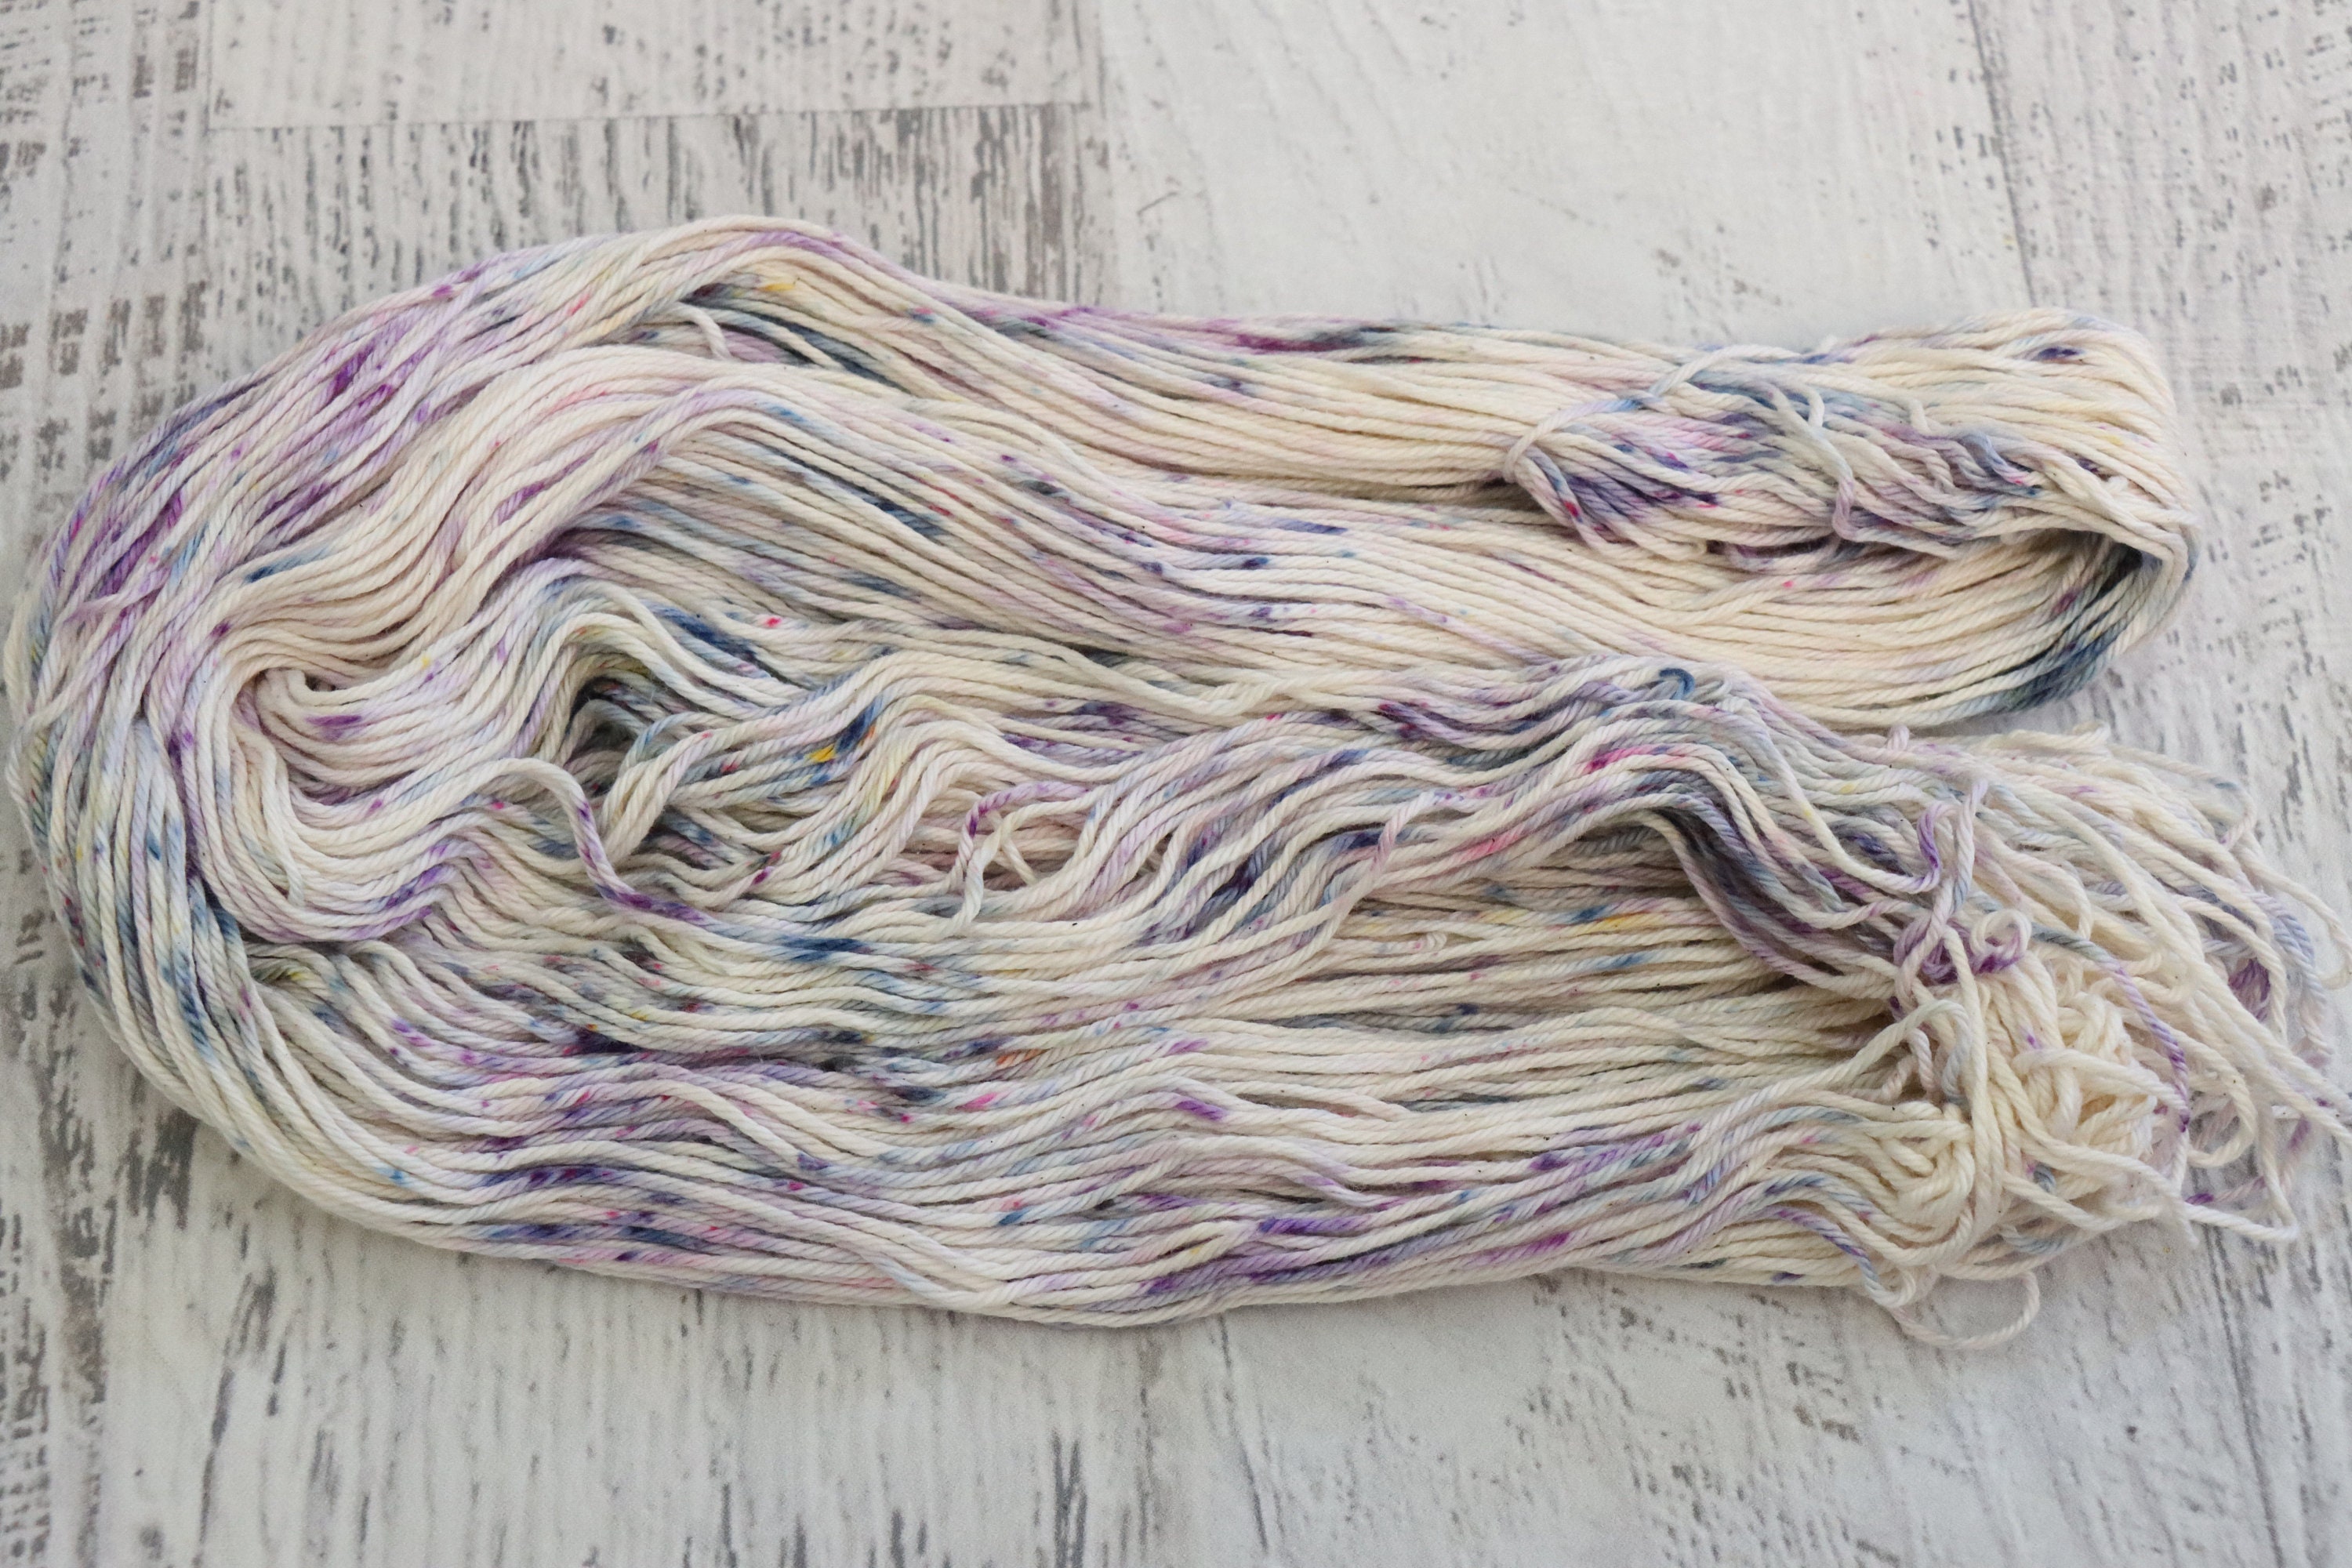 Speckled Worsted Weight Cotton Yarn 7525 Cotton/acrylic Hand Dyed